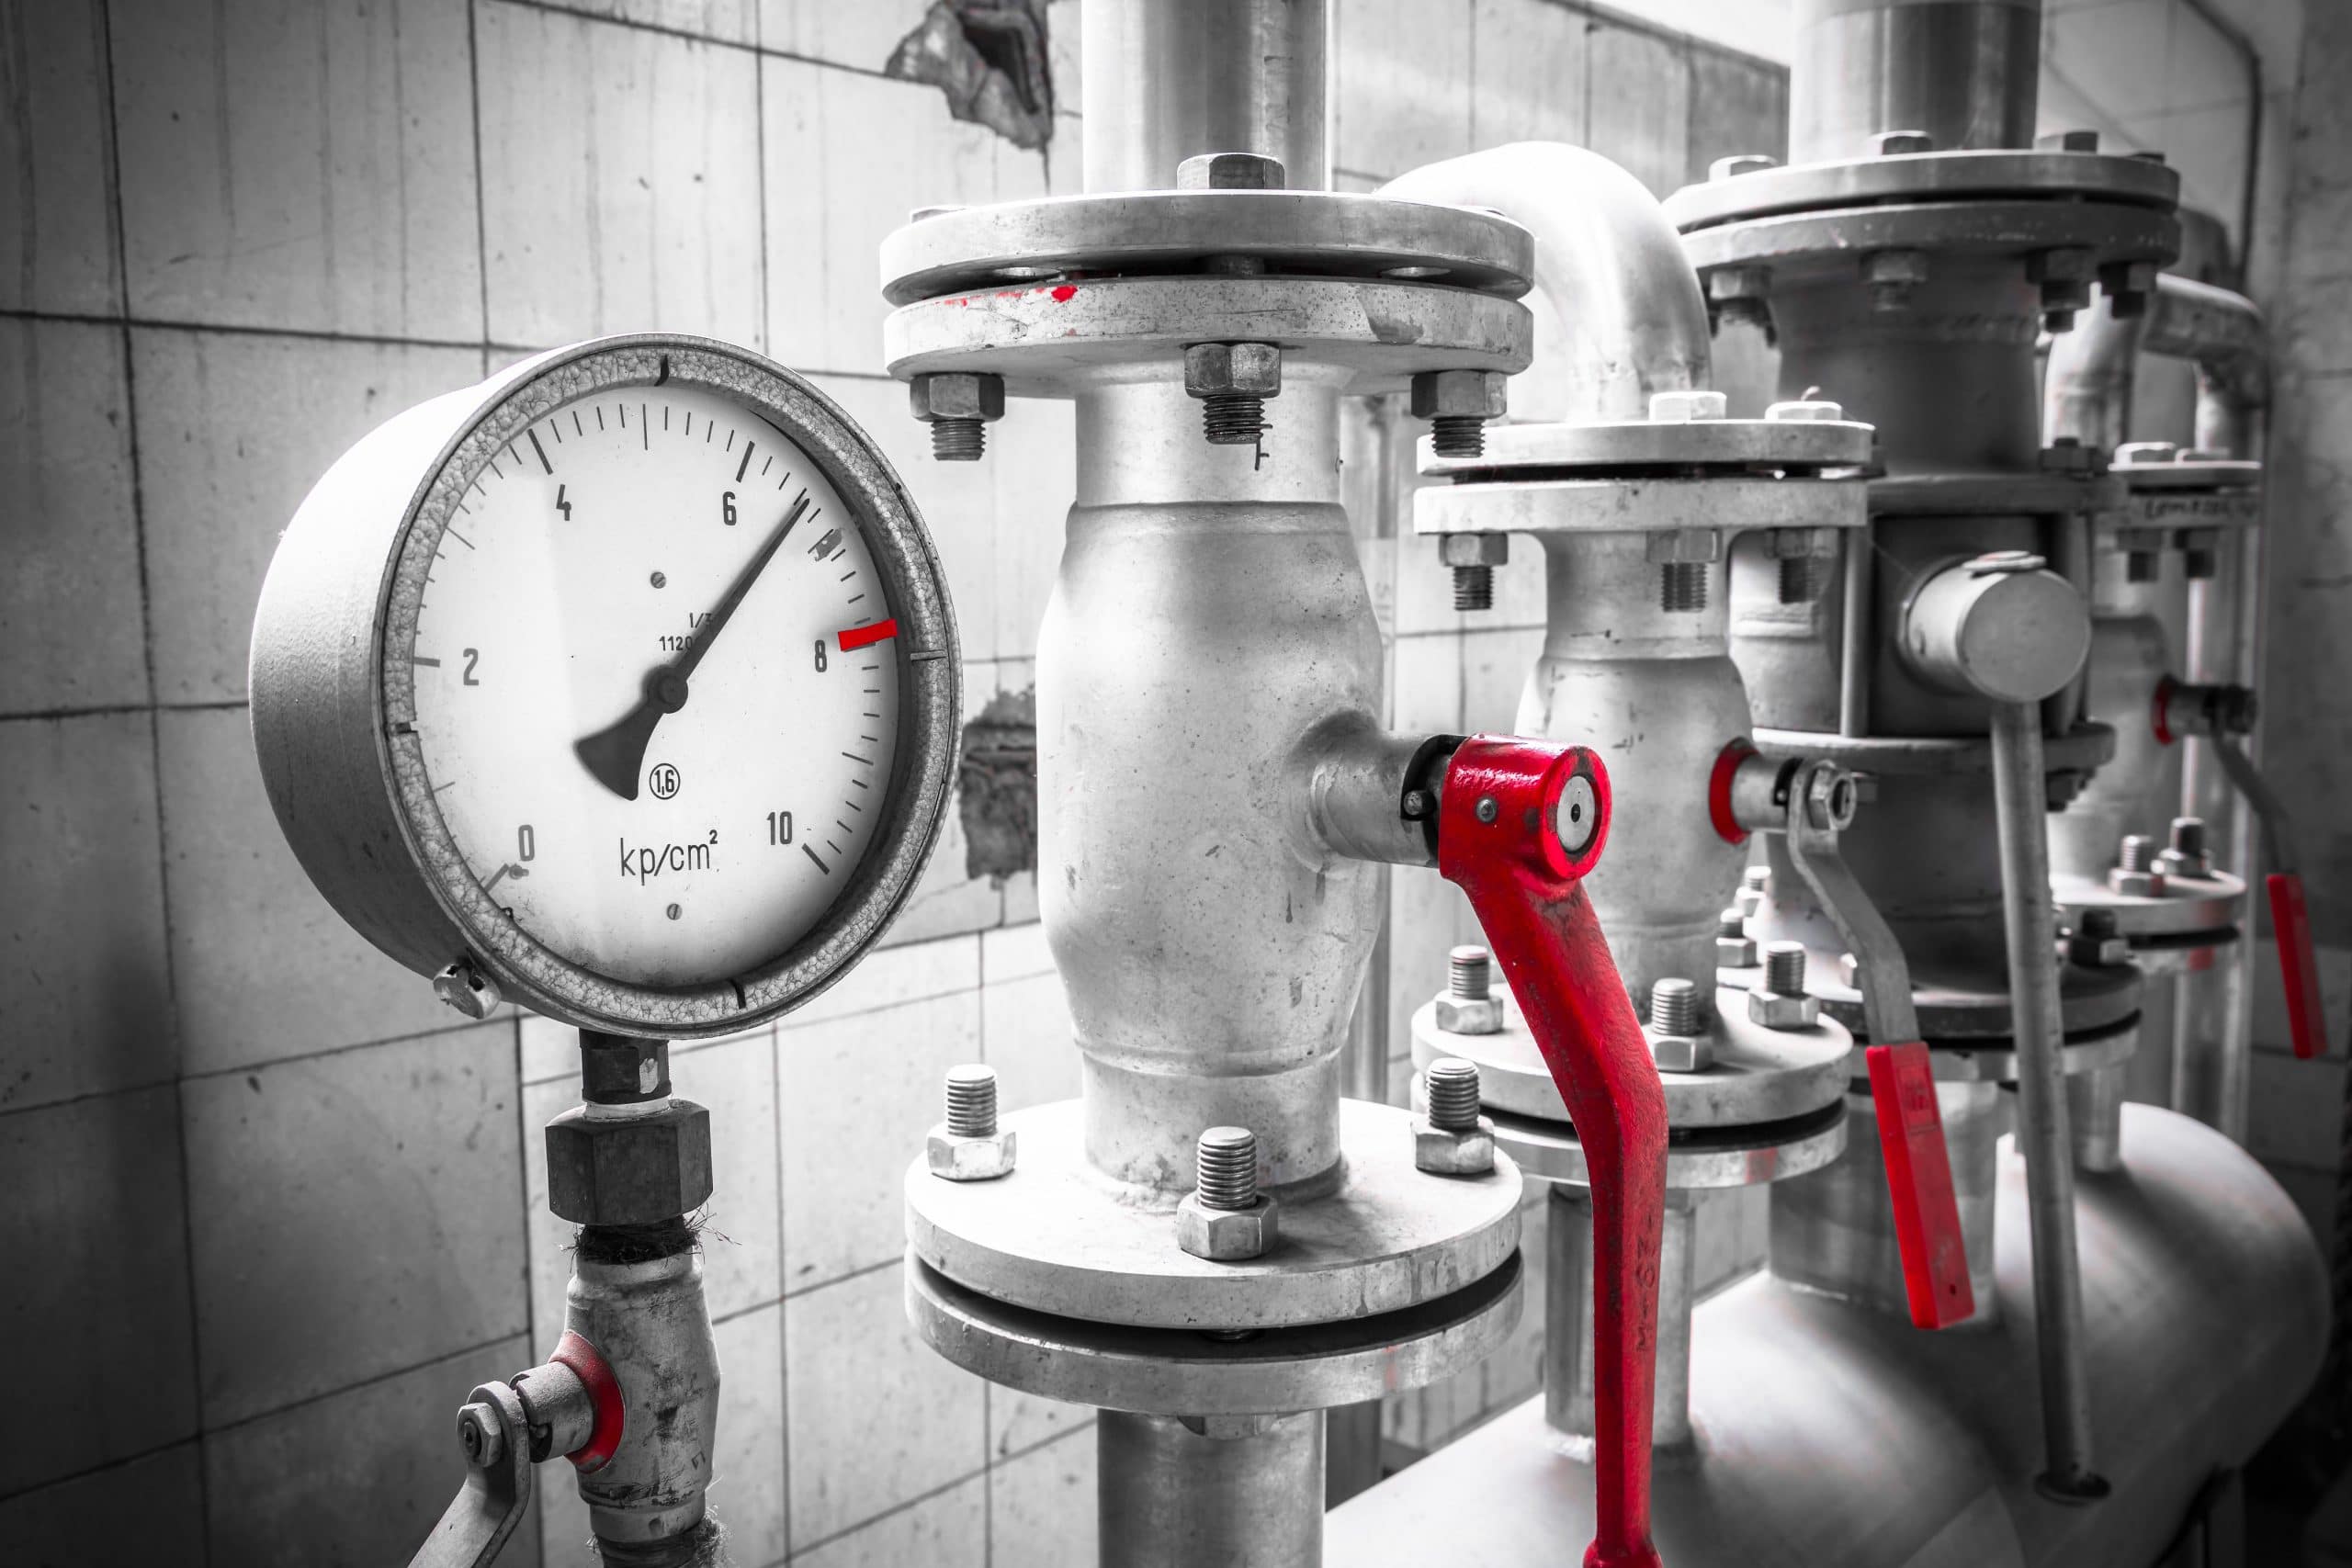 Stylish image of pressure gauge and vales in plant room